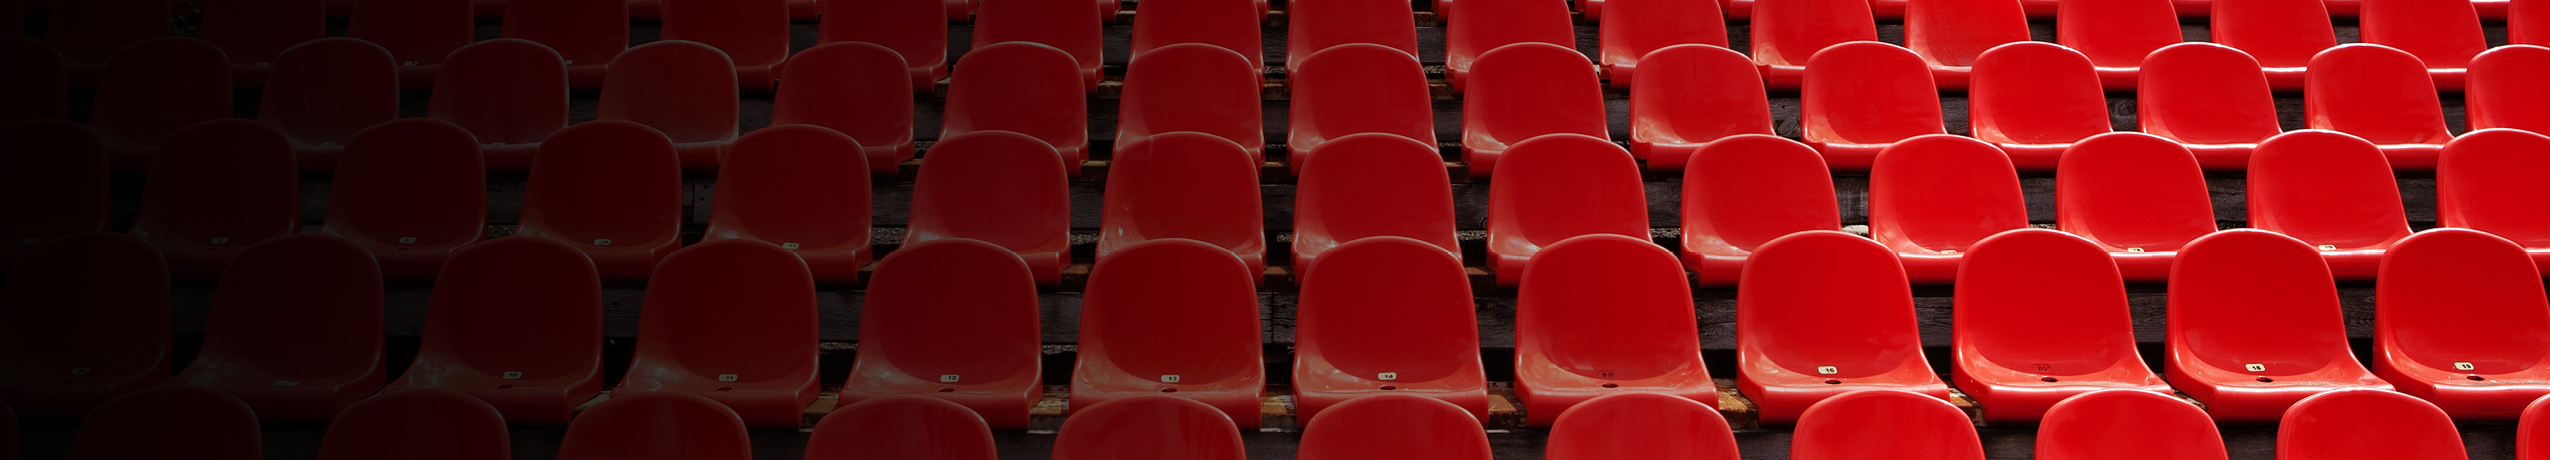 red chairs in a stadium